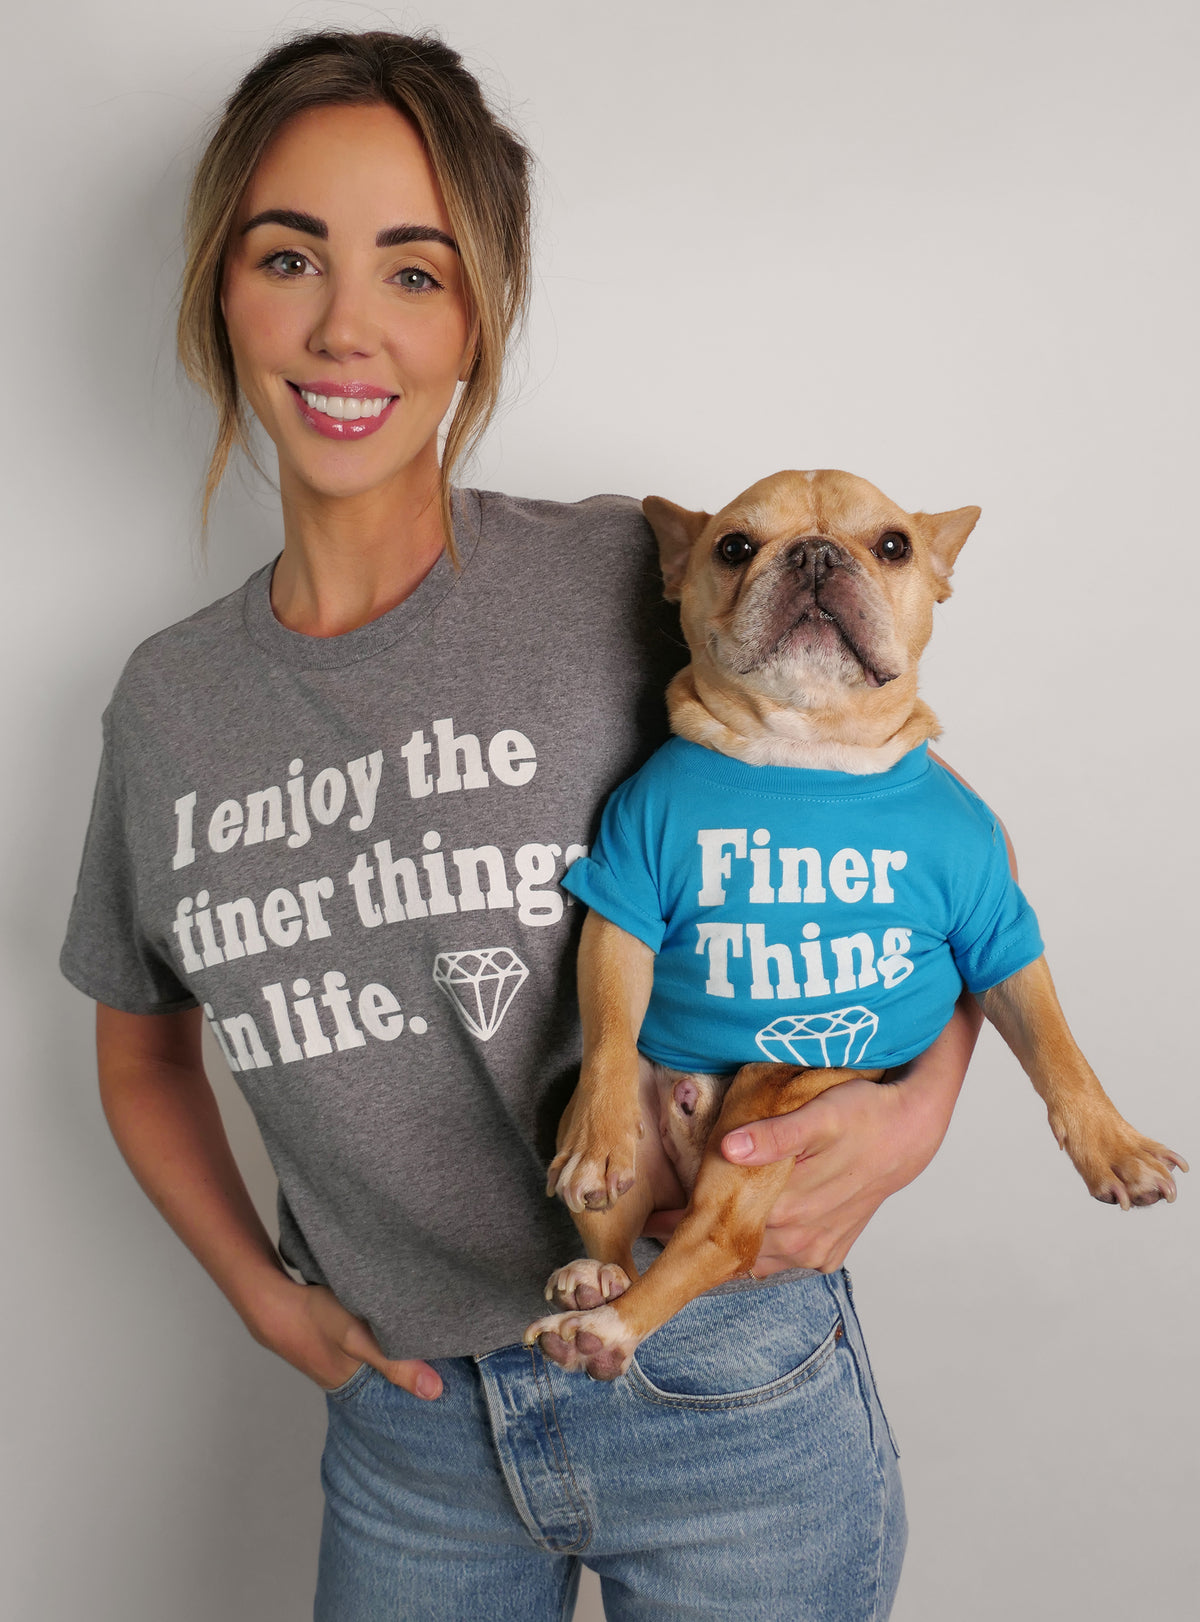 The Finer Things in Life Matching T-Shirt Set